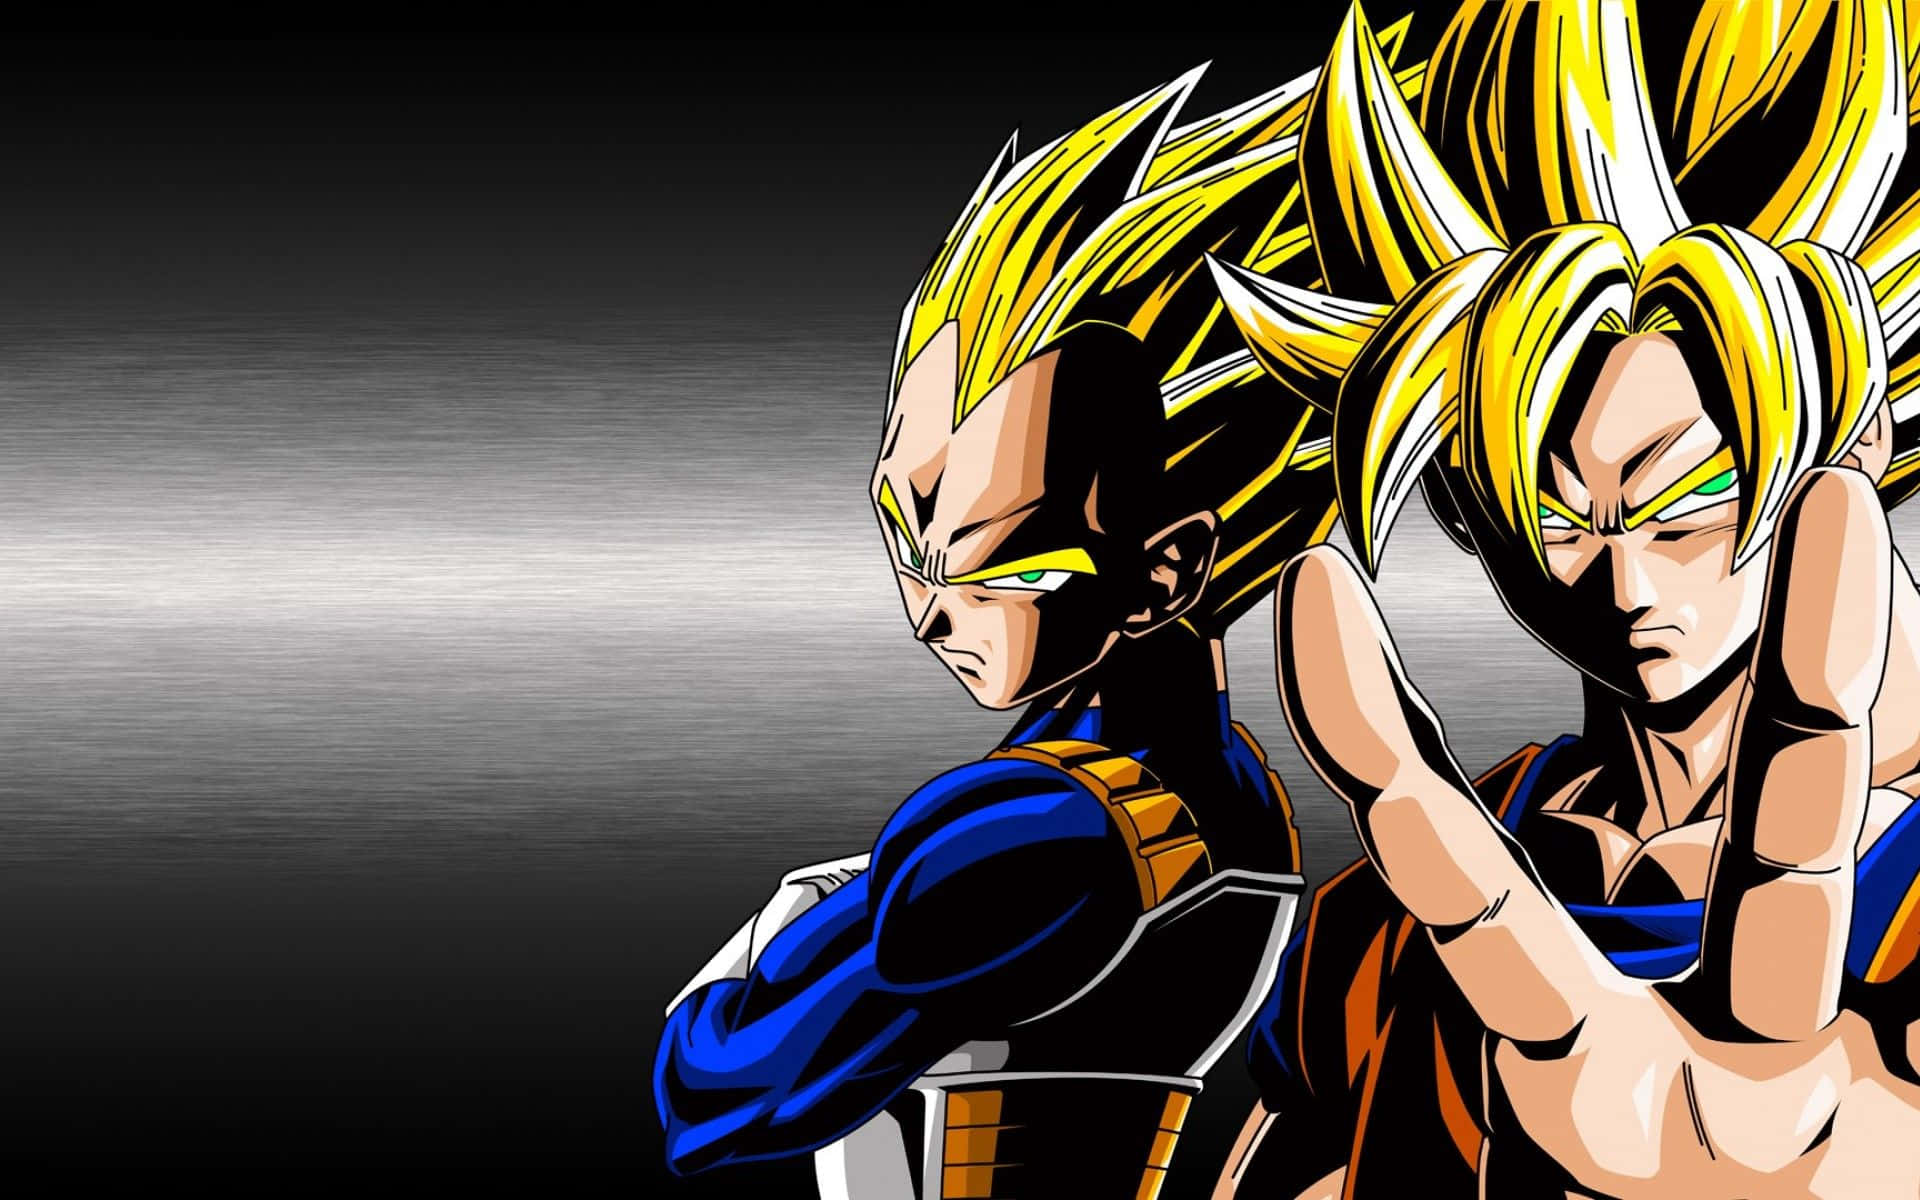 Dragon Ball Multiverse on X: THE SPECIAL LIVE GOKU VS VEGETA IS